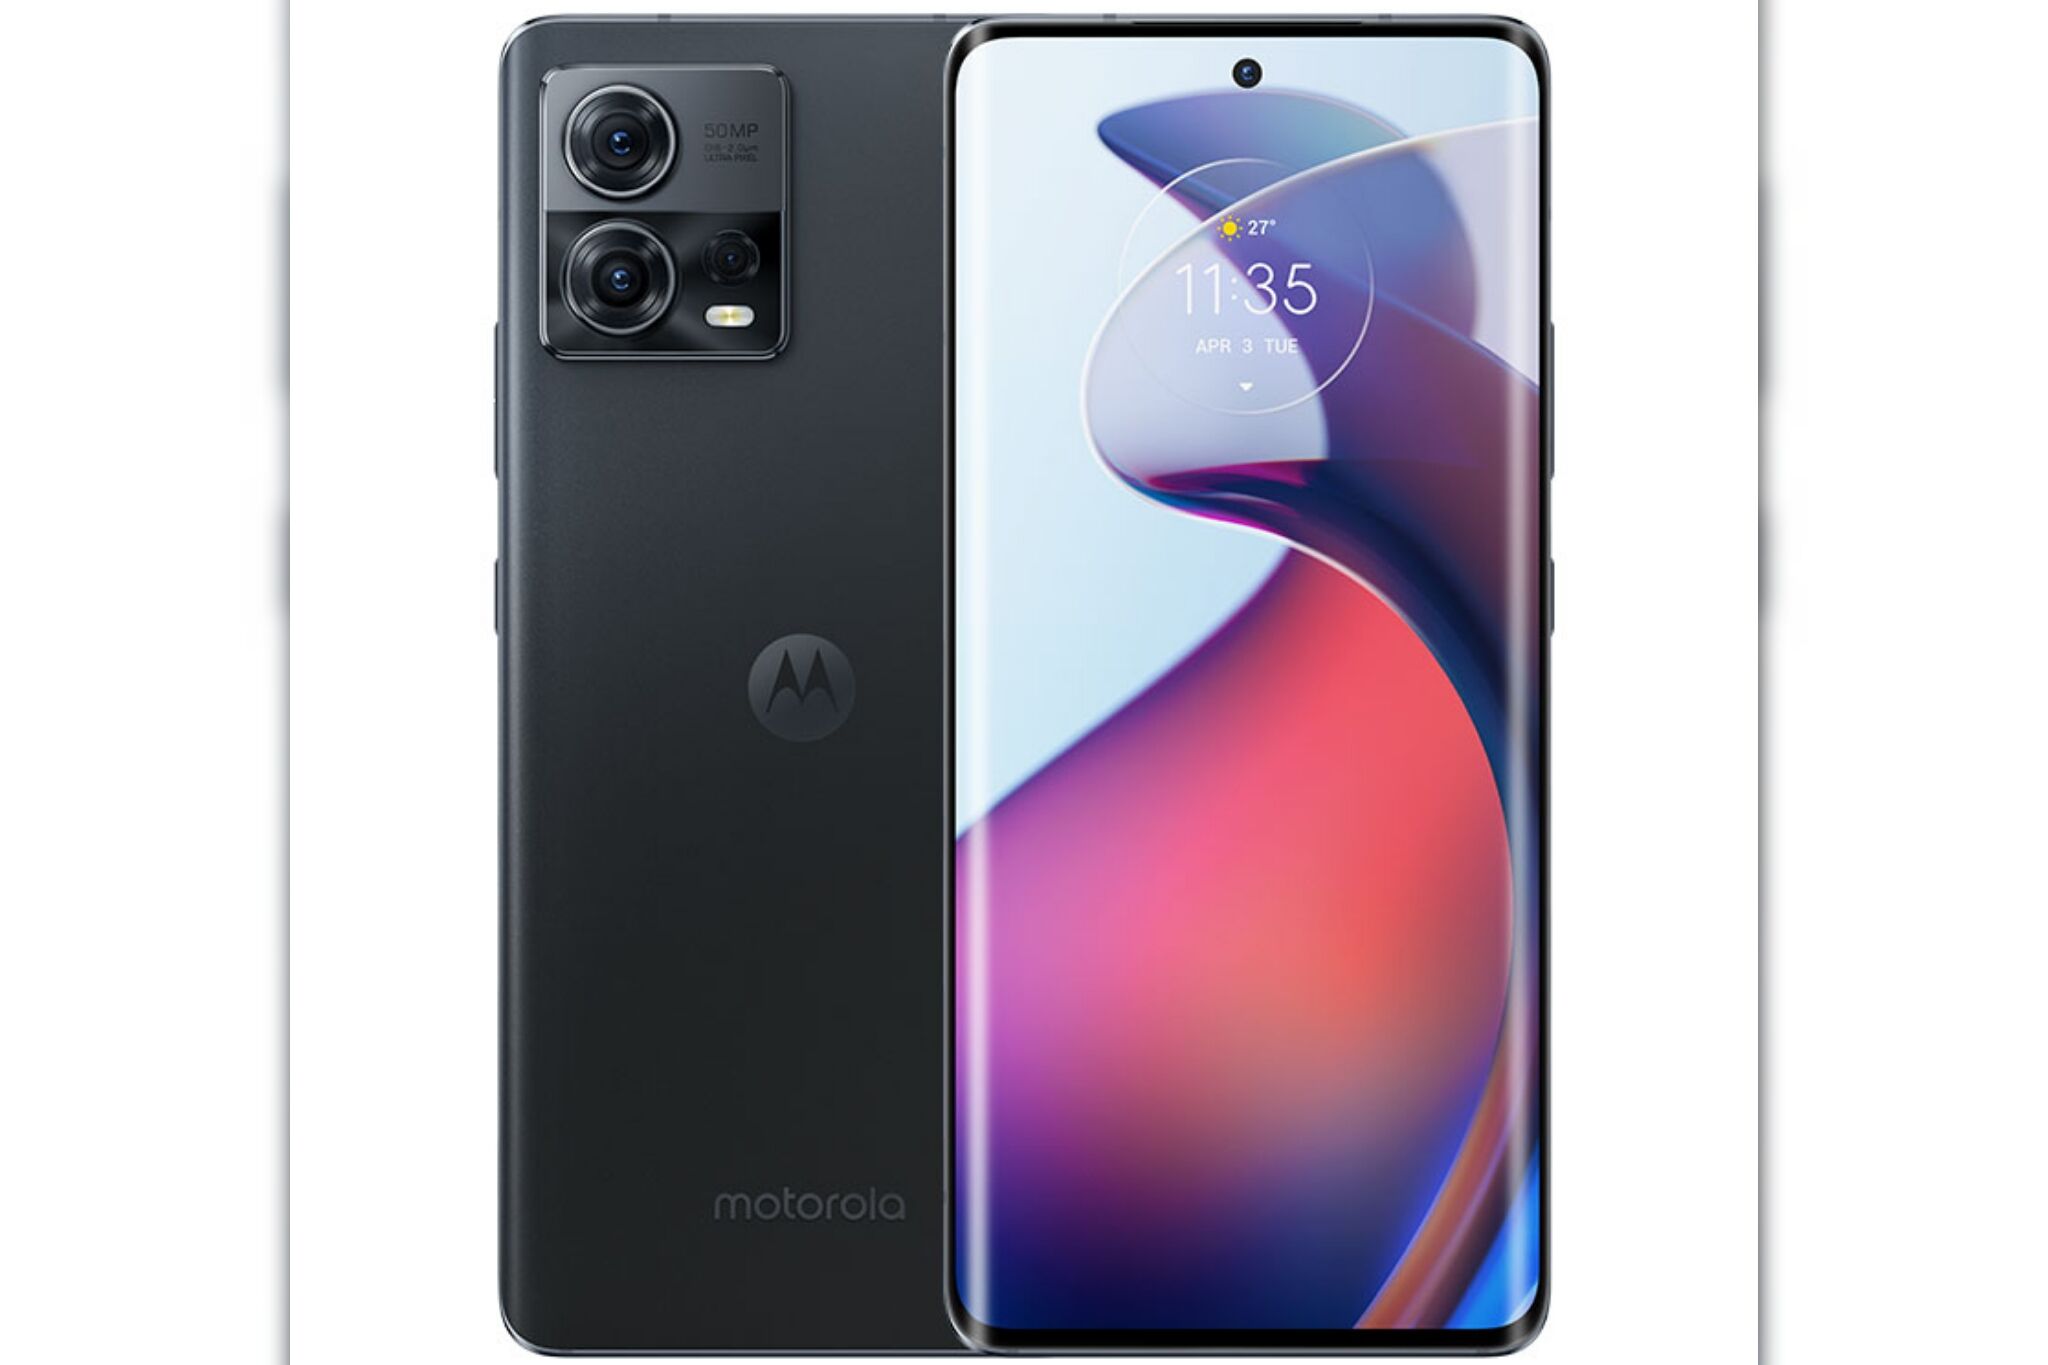 Motorola X30 Pro: World’s first phone launch with 200MP camera, 125W fast charging and many great features